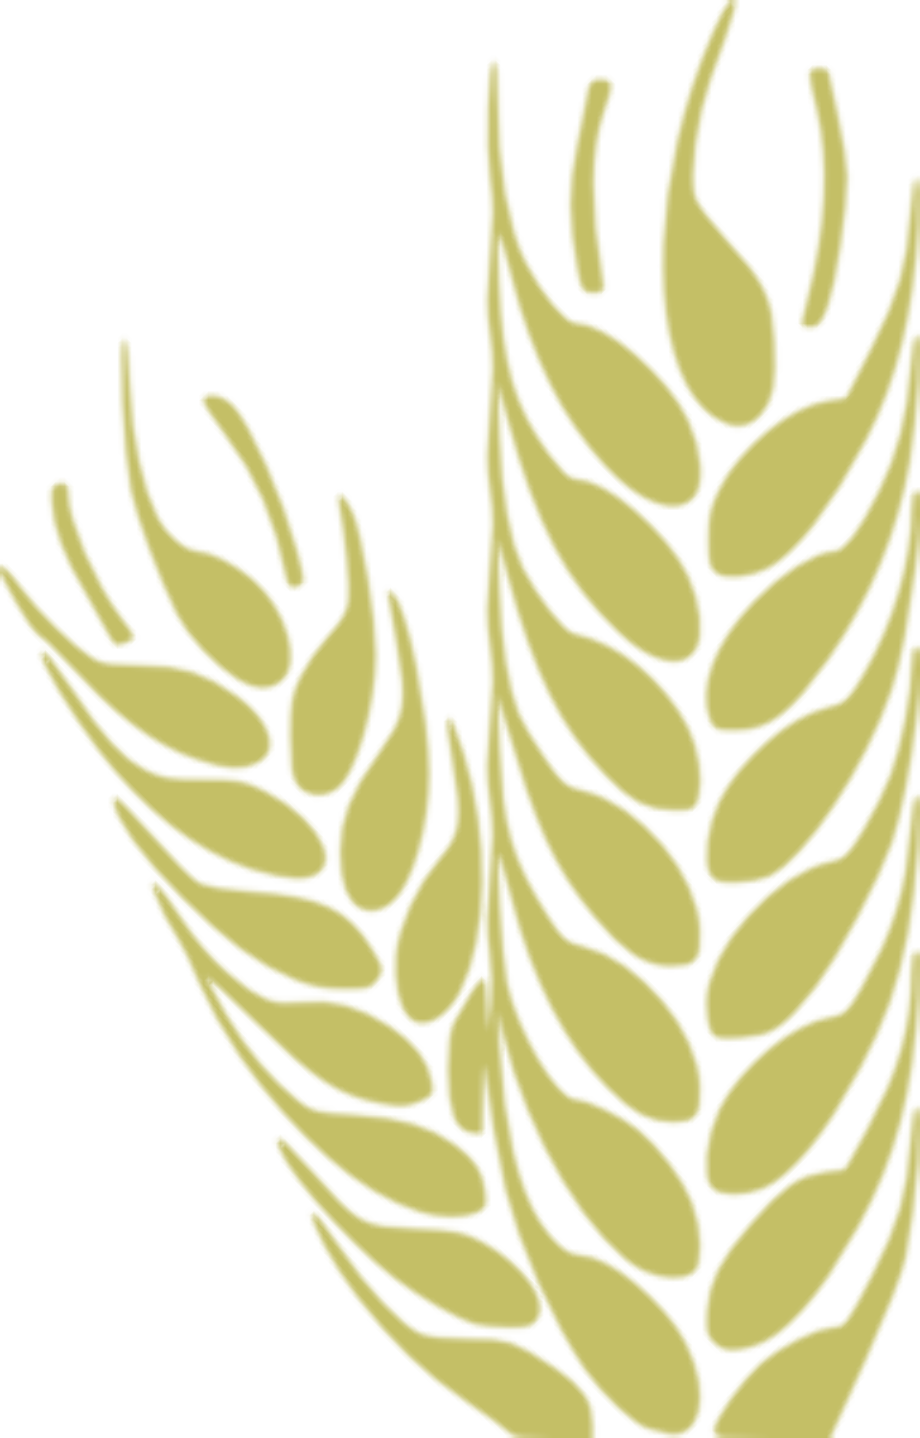 Download High Quality wheat clipart easy Transparent PNG Images - Art